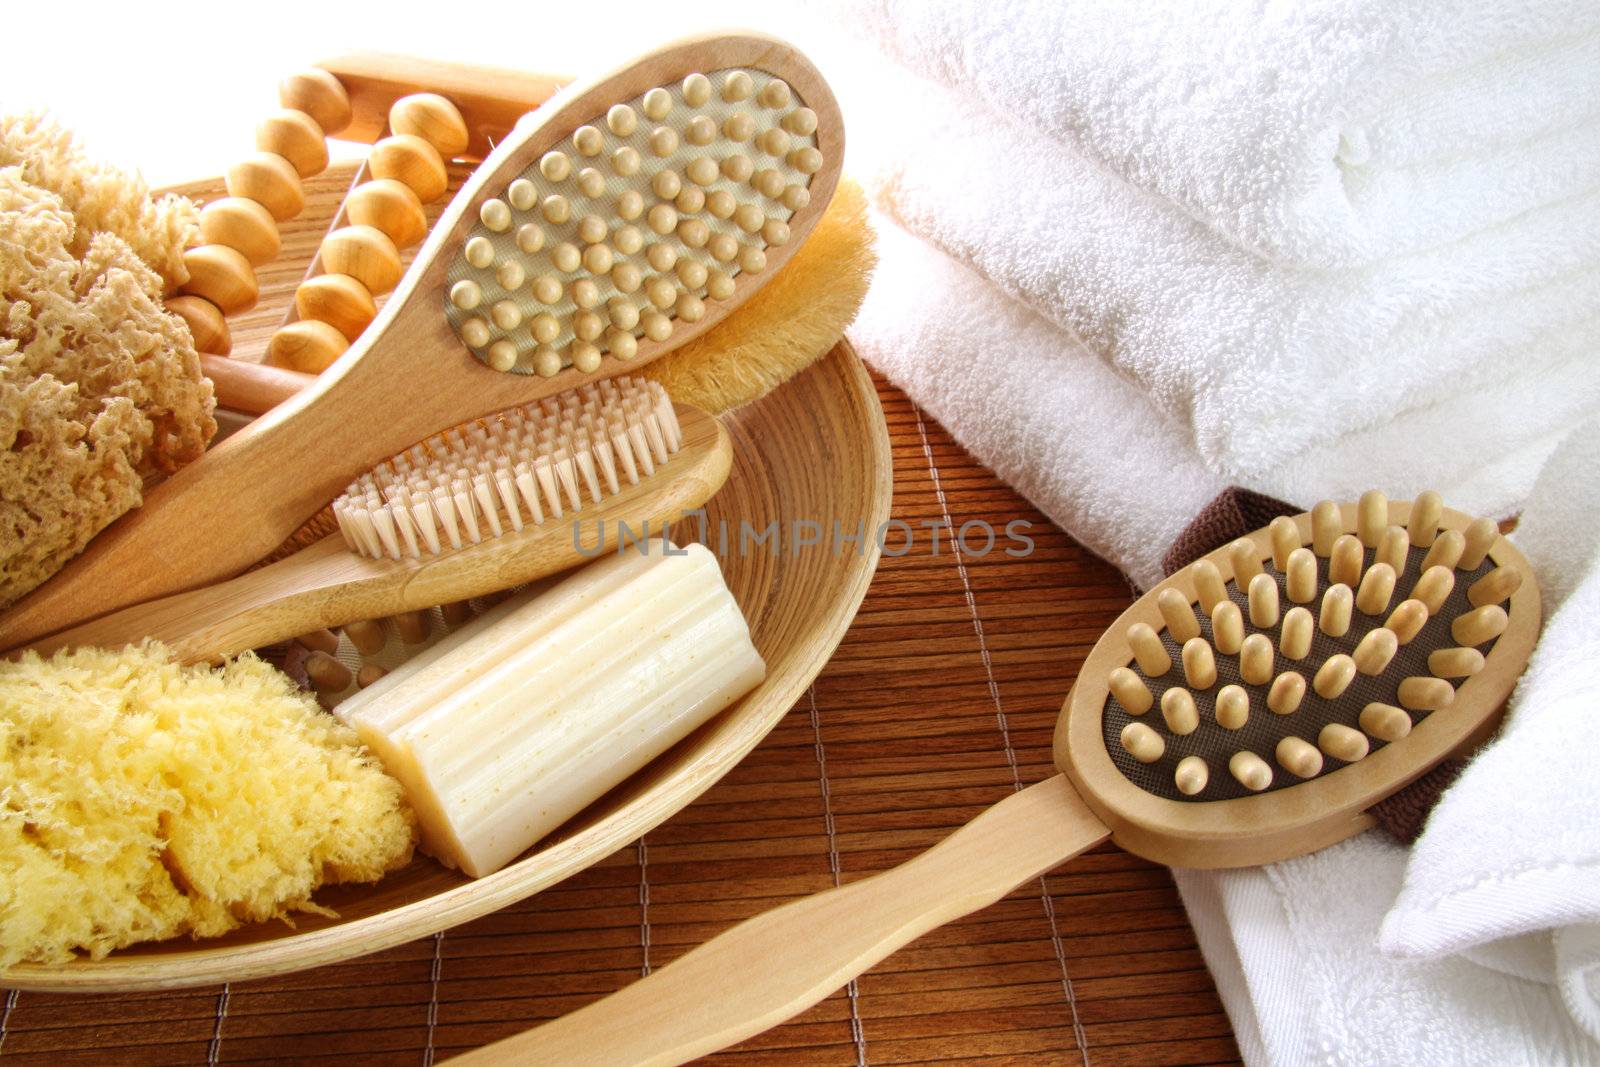 Assortment of spa brushes and accessories  by Sandralise